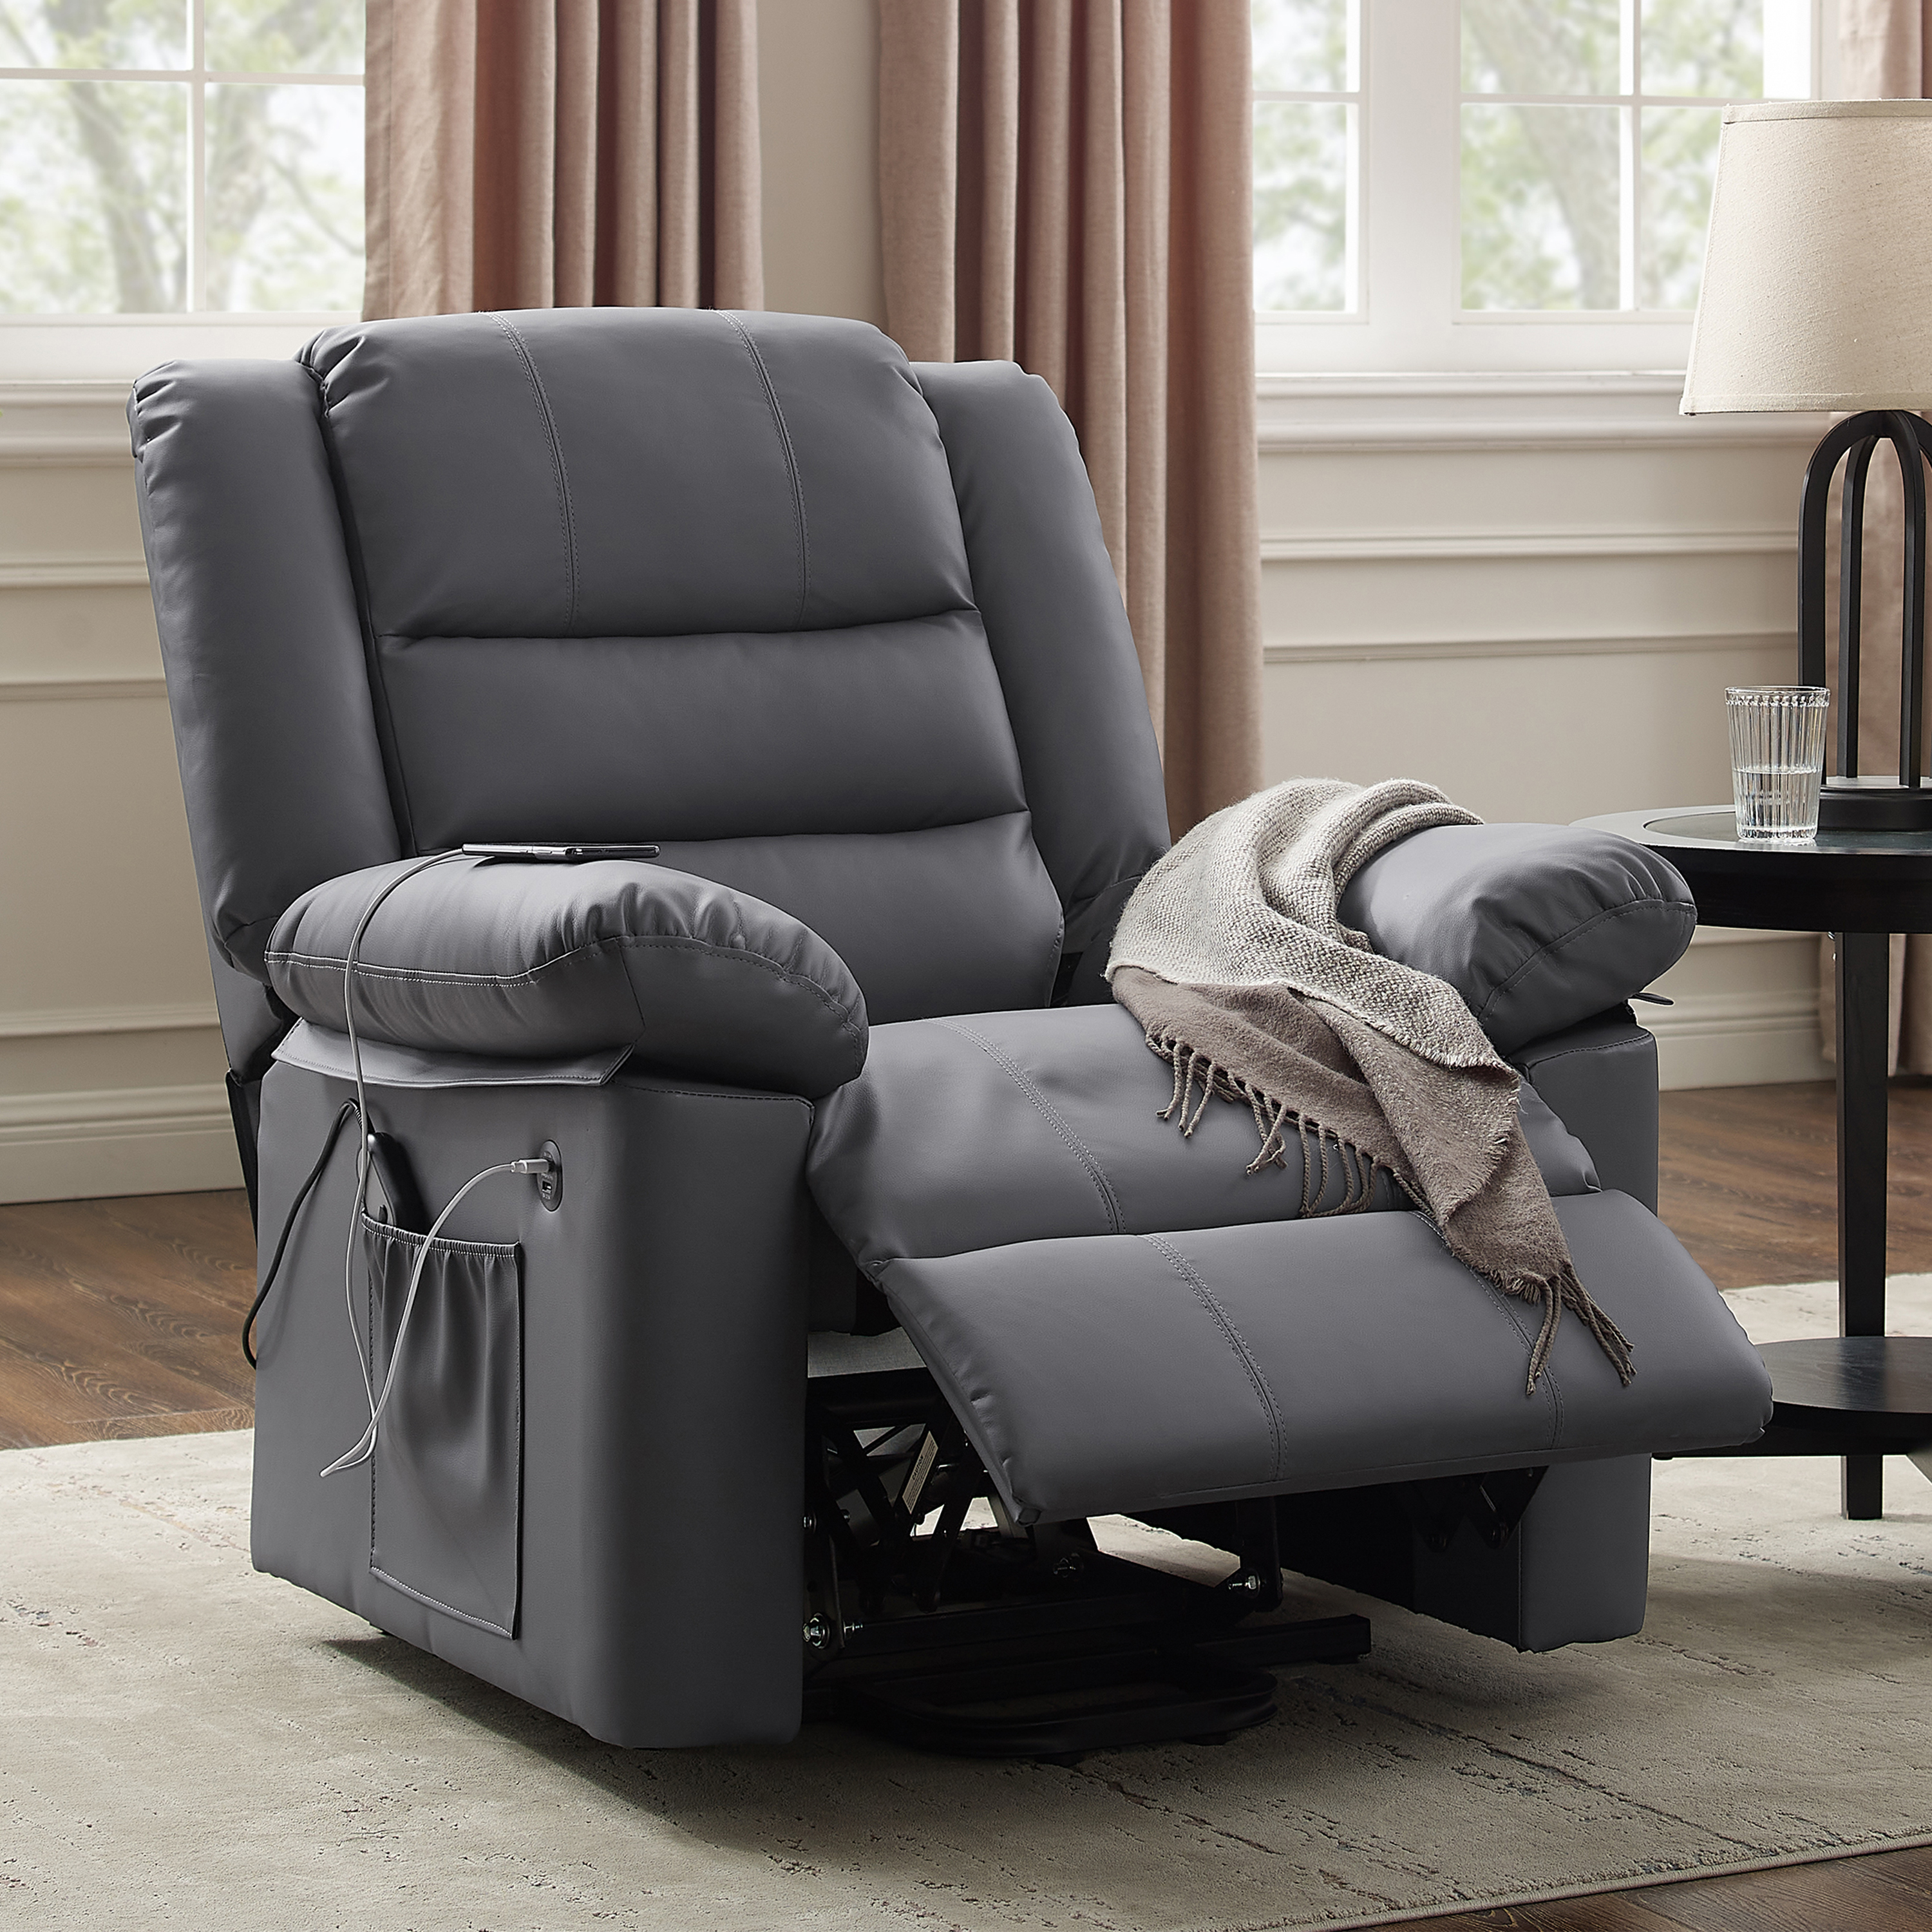 Hillsdale Cedar City Power Lift Faux Leather Recliner with USB, Dusk Gray - image 1 of 23